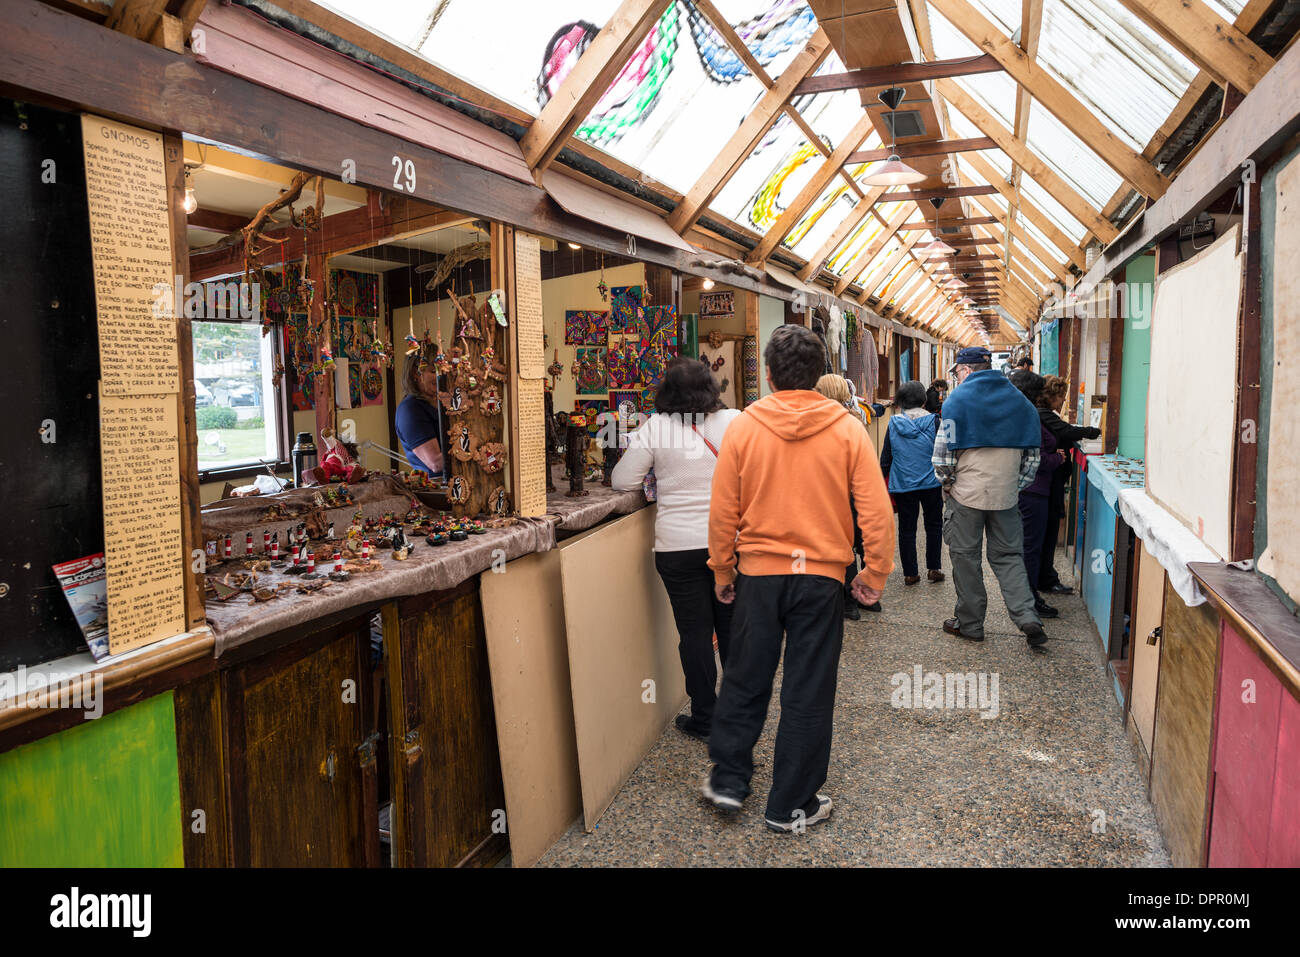 USHUAIA, Argentina - A covered arts and craft market on the waterfront of Ushuaia, Argentina. Stock Photo